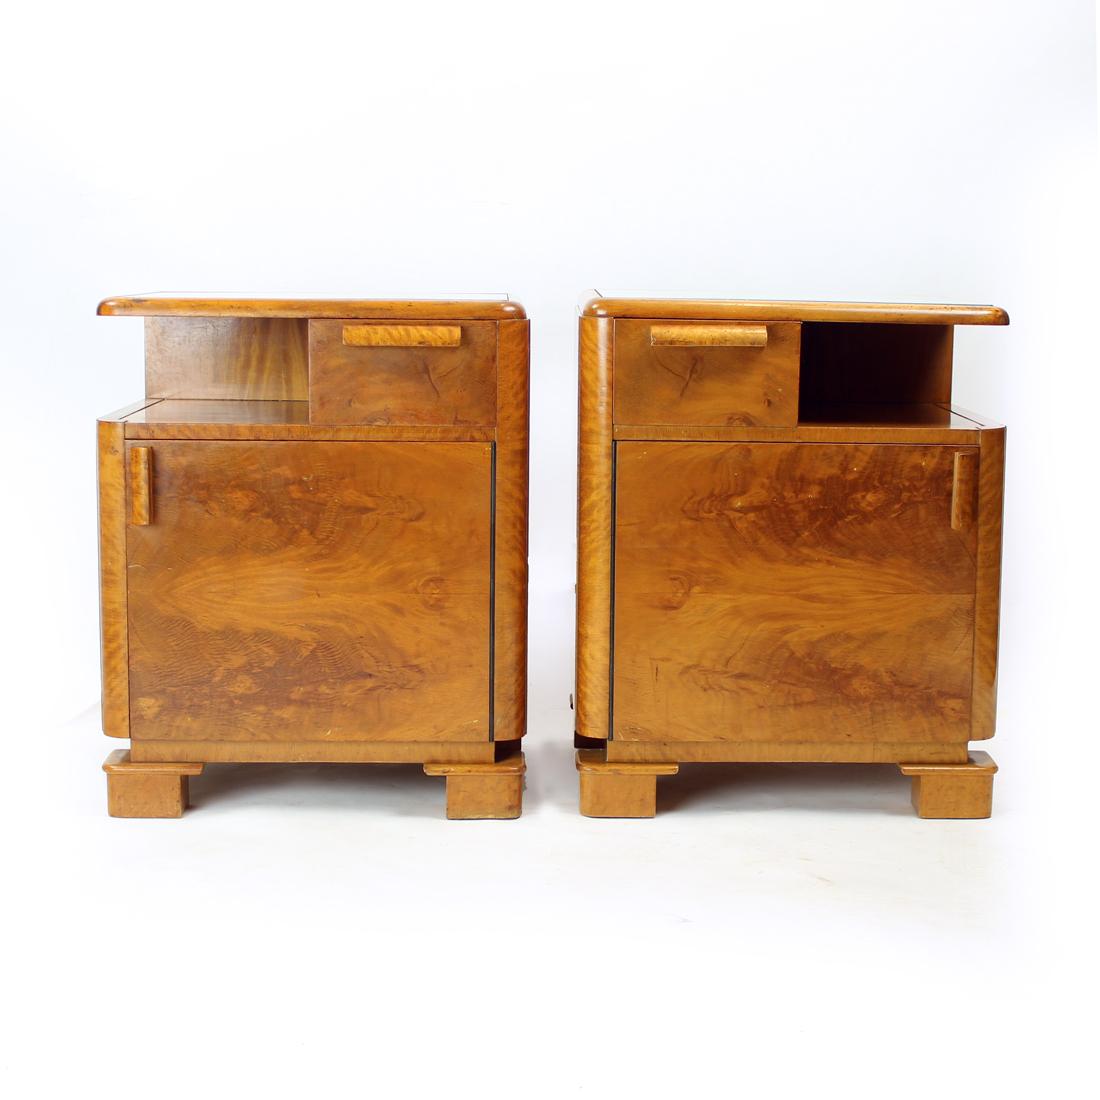 These are unique bedside tables, very typical for the Art Deco era. Produced in 1930s in Czechoslovakia. The tables are made of oak wood with walnut veneer on the whole tables. Full of amazing details and style. There is a drawer in the top side of